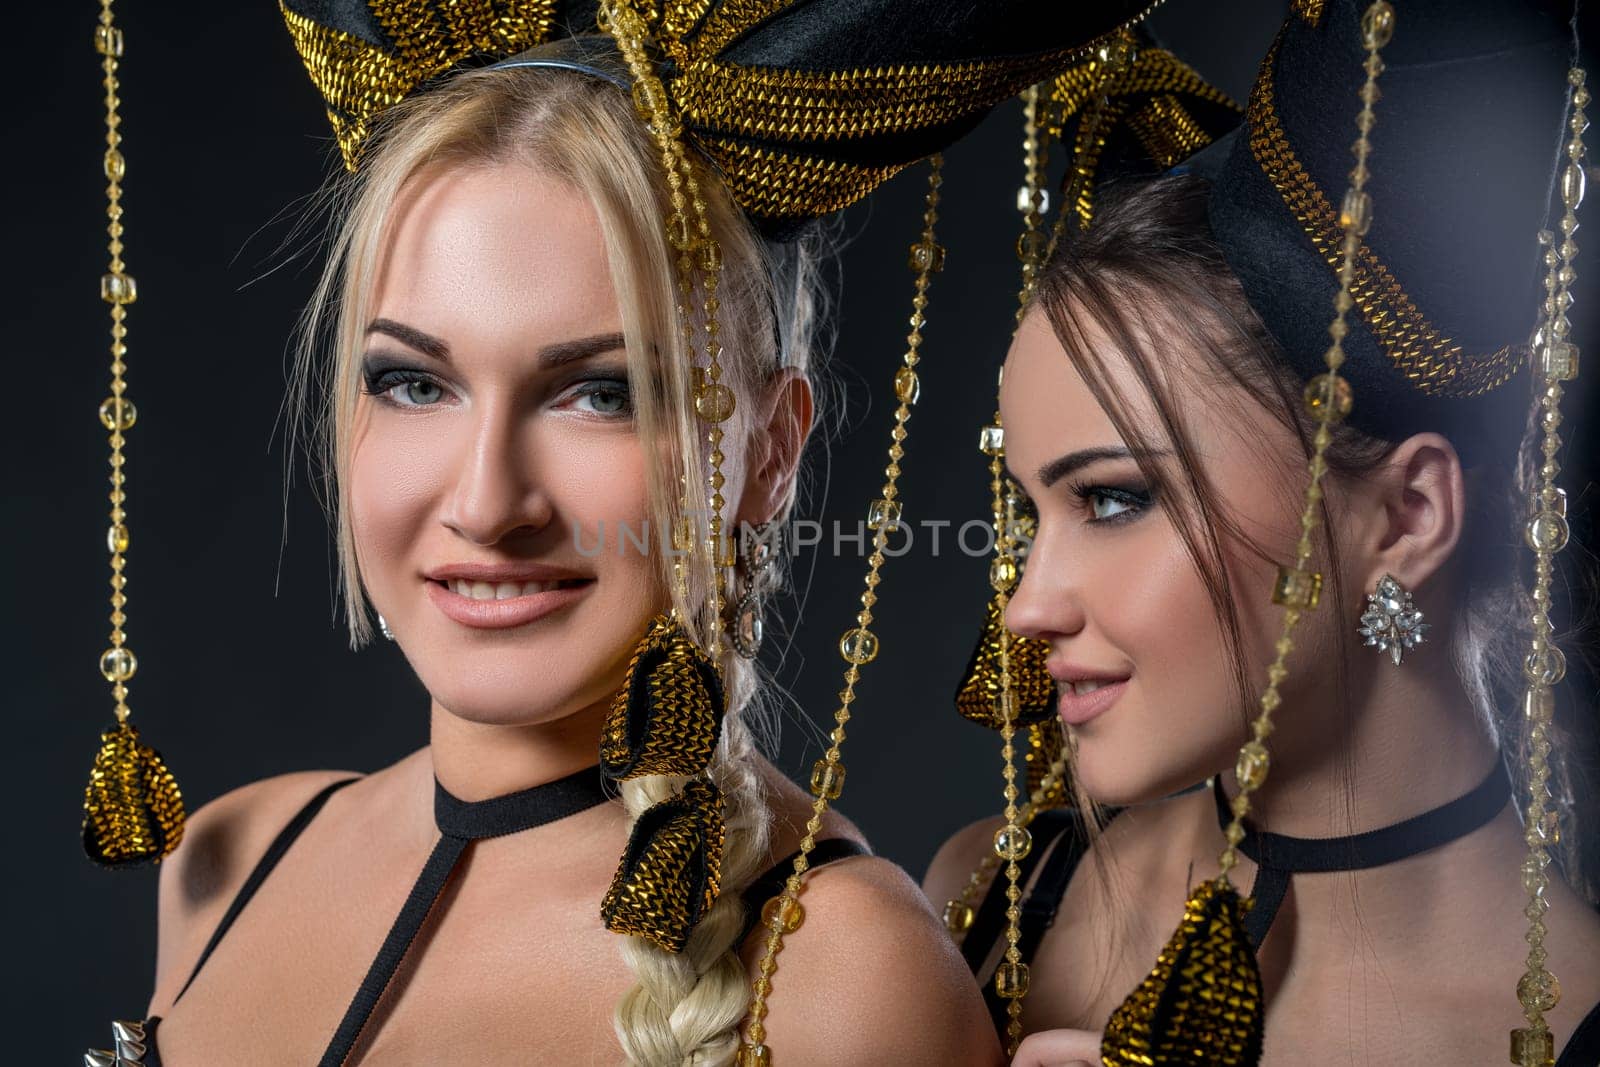 Portrait of sexy dancers in headdresses with tassels